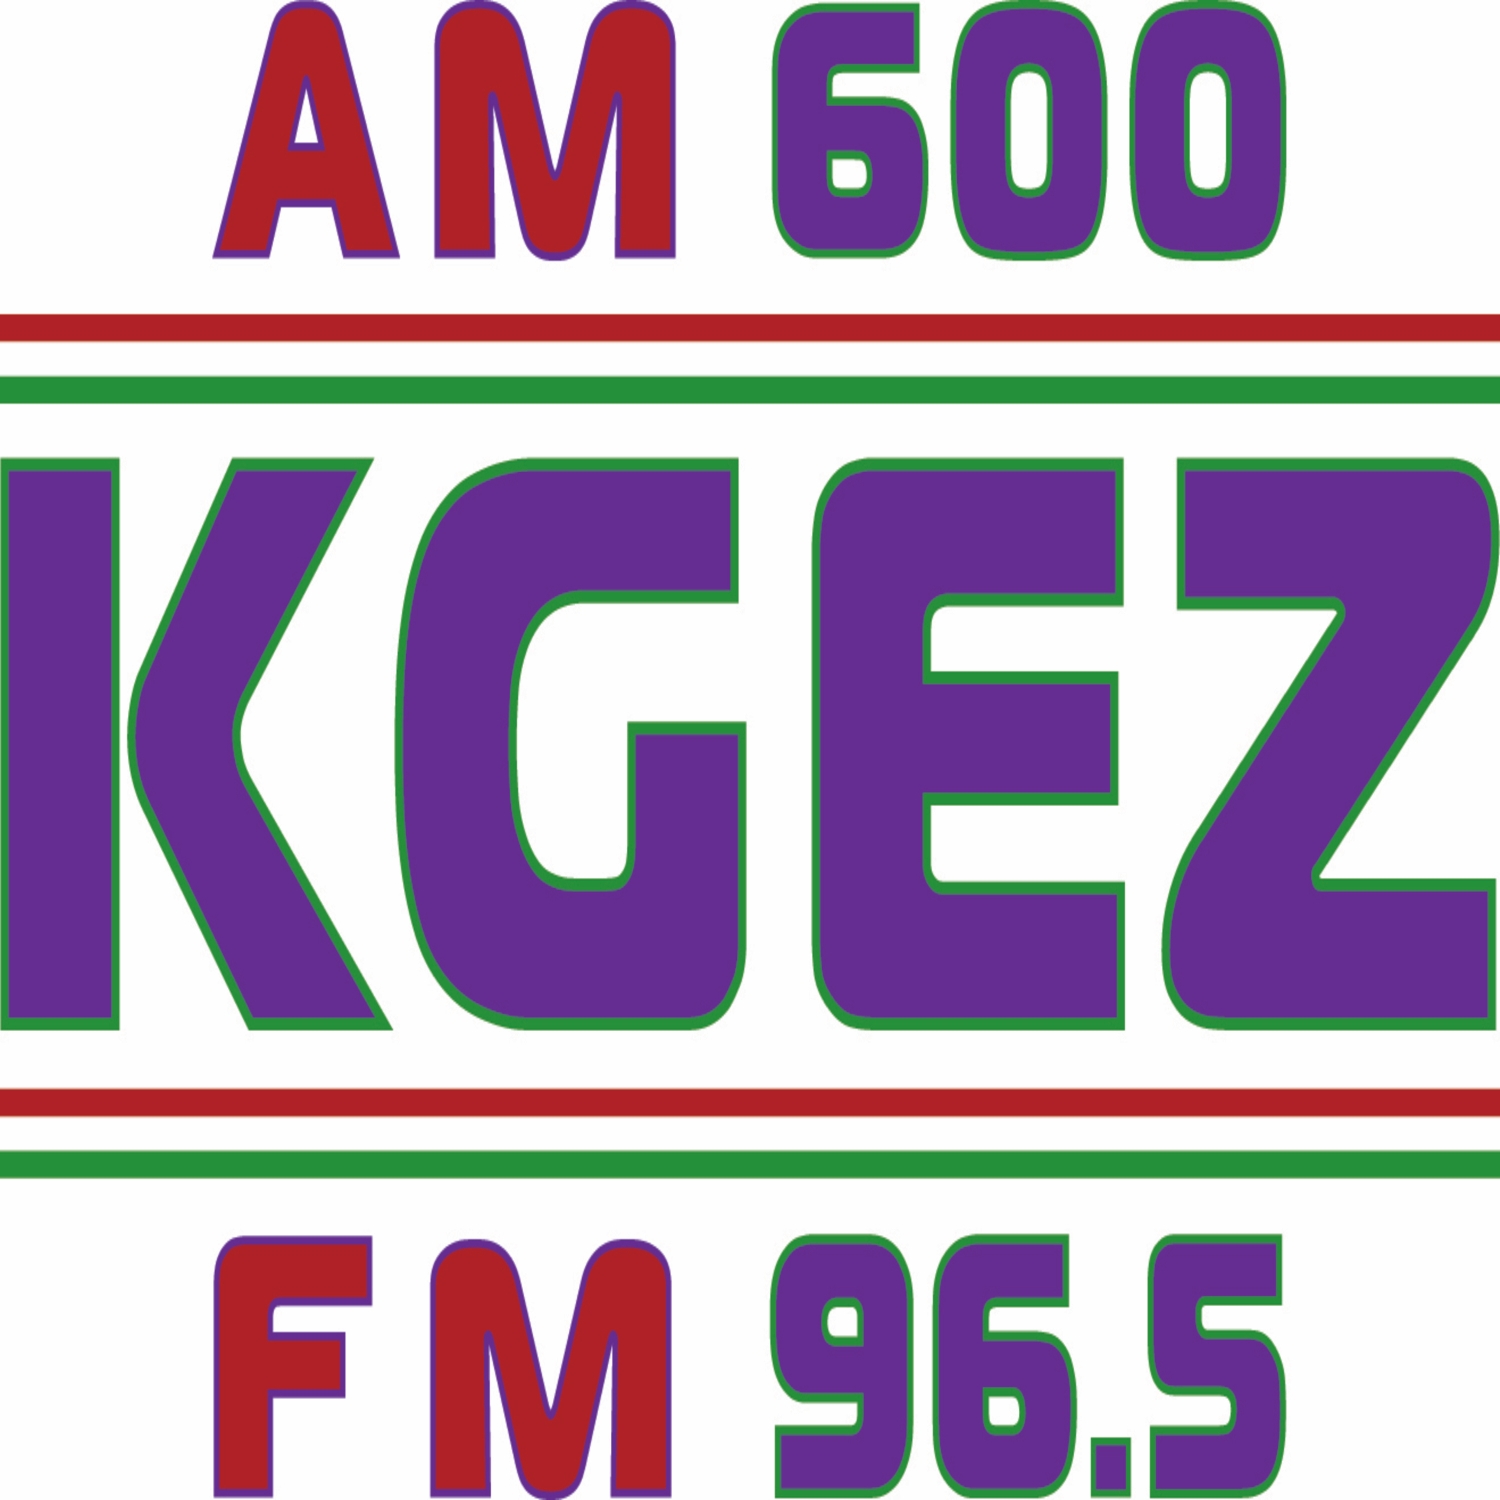 The KGEZ Good Morning Show